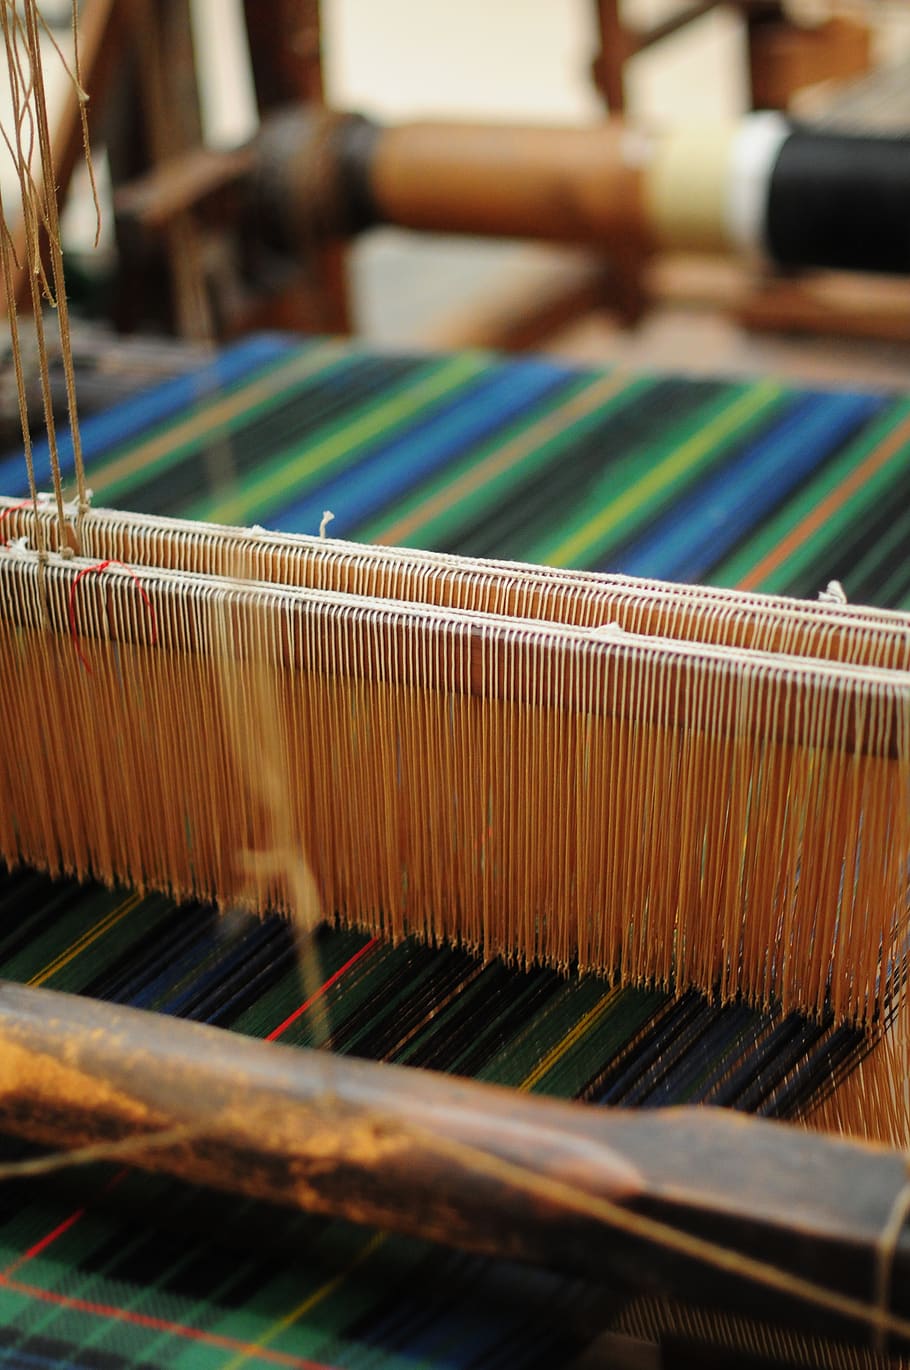 HD Wallpaper Weaving Sewing Craft Fabric Textile Cotton